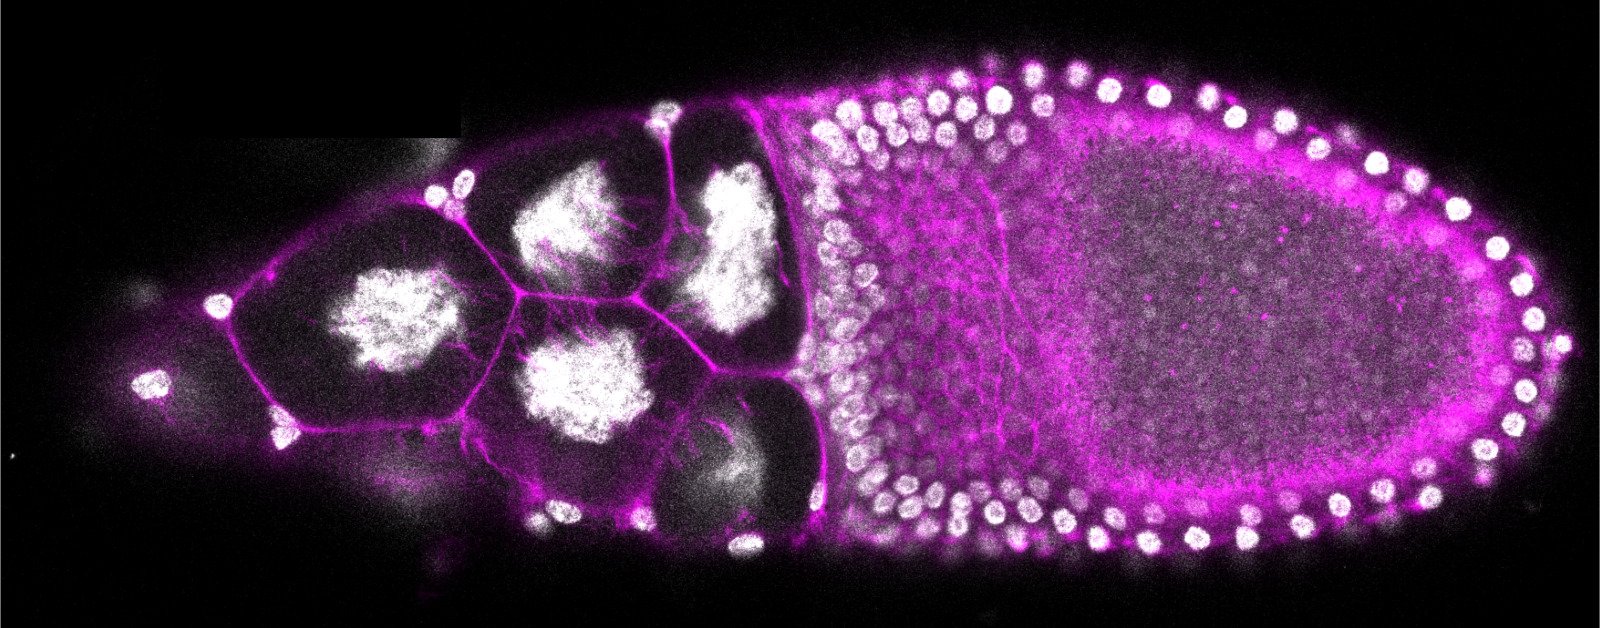 Fruit Fly (Drosophila) egg chamber. Actin filaments in magenta and nucleus/DNA in grey. Taken during #Embryo21 on ZEISS microscope. Credit: Viraj Doddihal, Graduate Student at the Stowers Institute for Medical Research, under direction of Sally Horne-Badovinac 